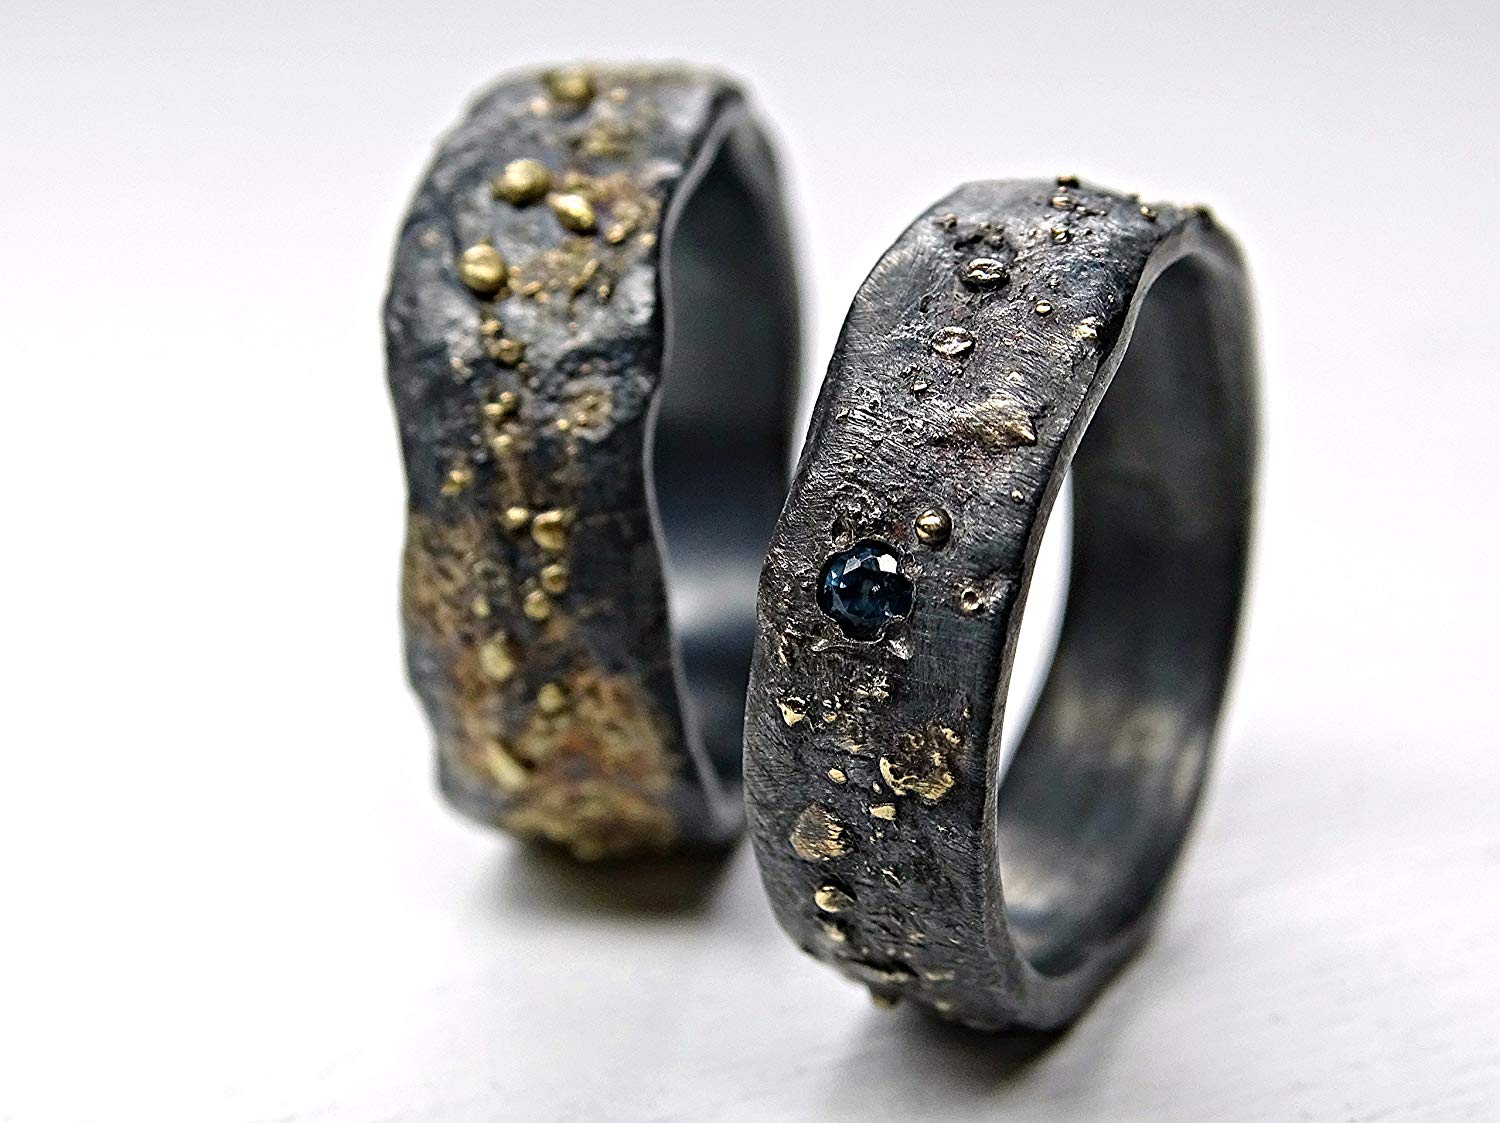 Matching his and hers Black Sterling Silver and 14K Gold